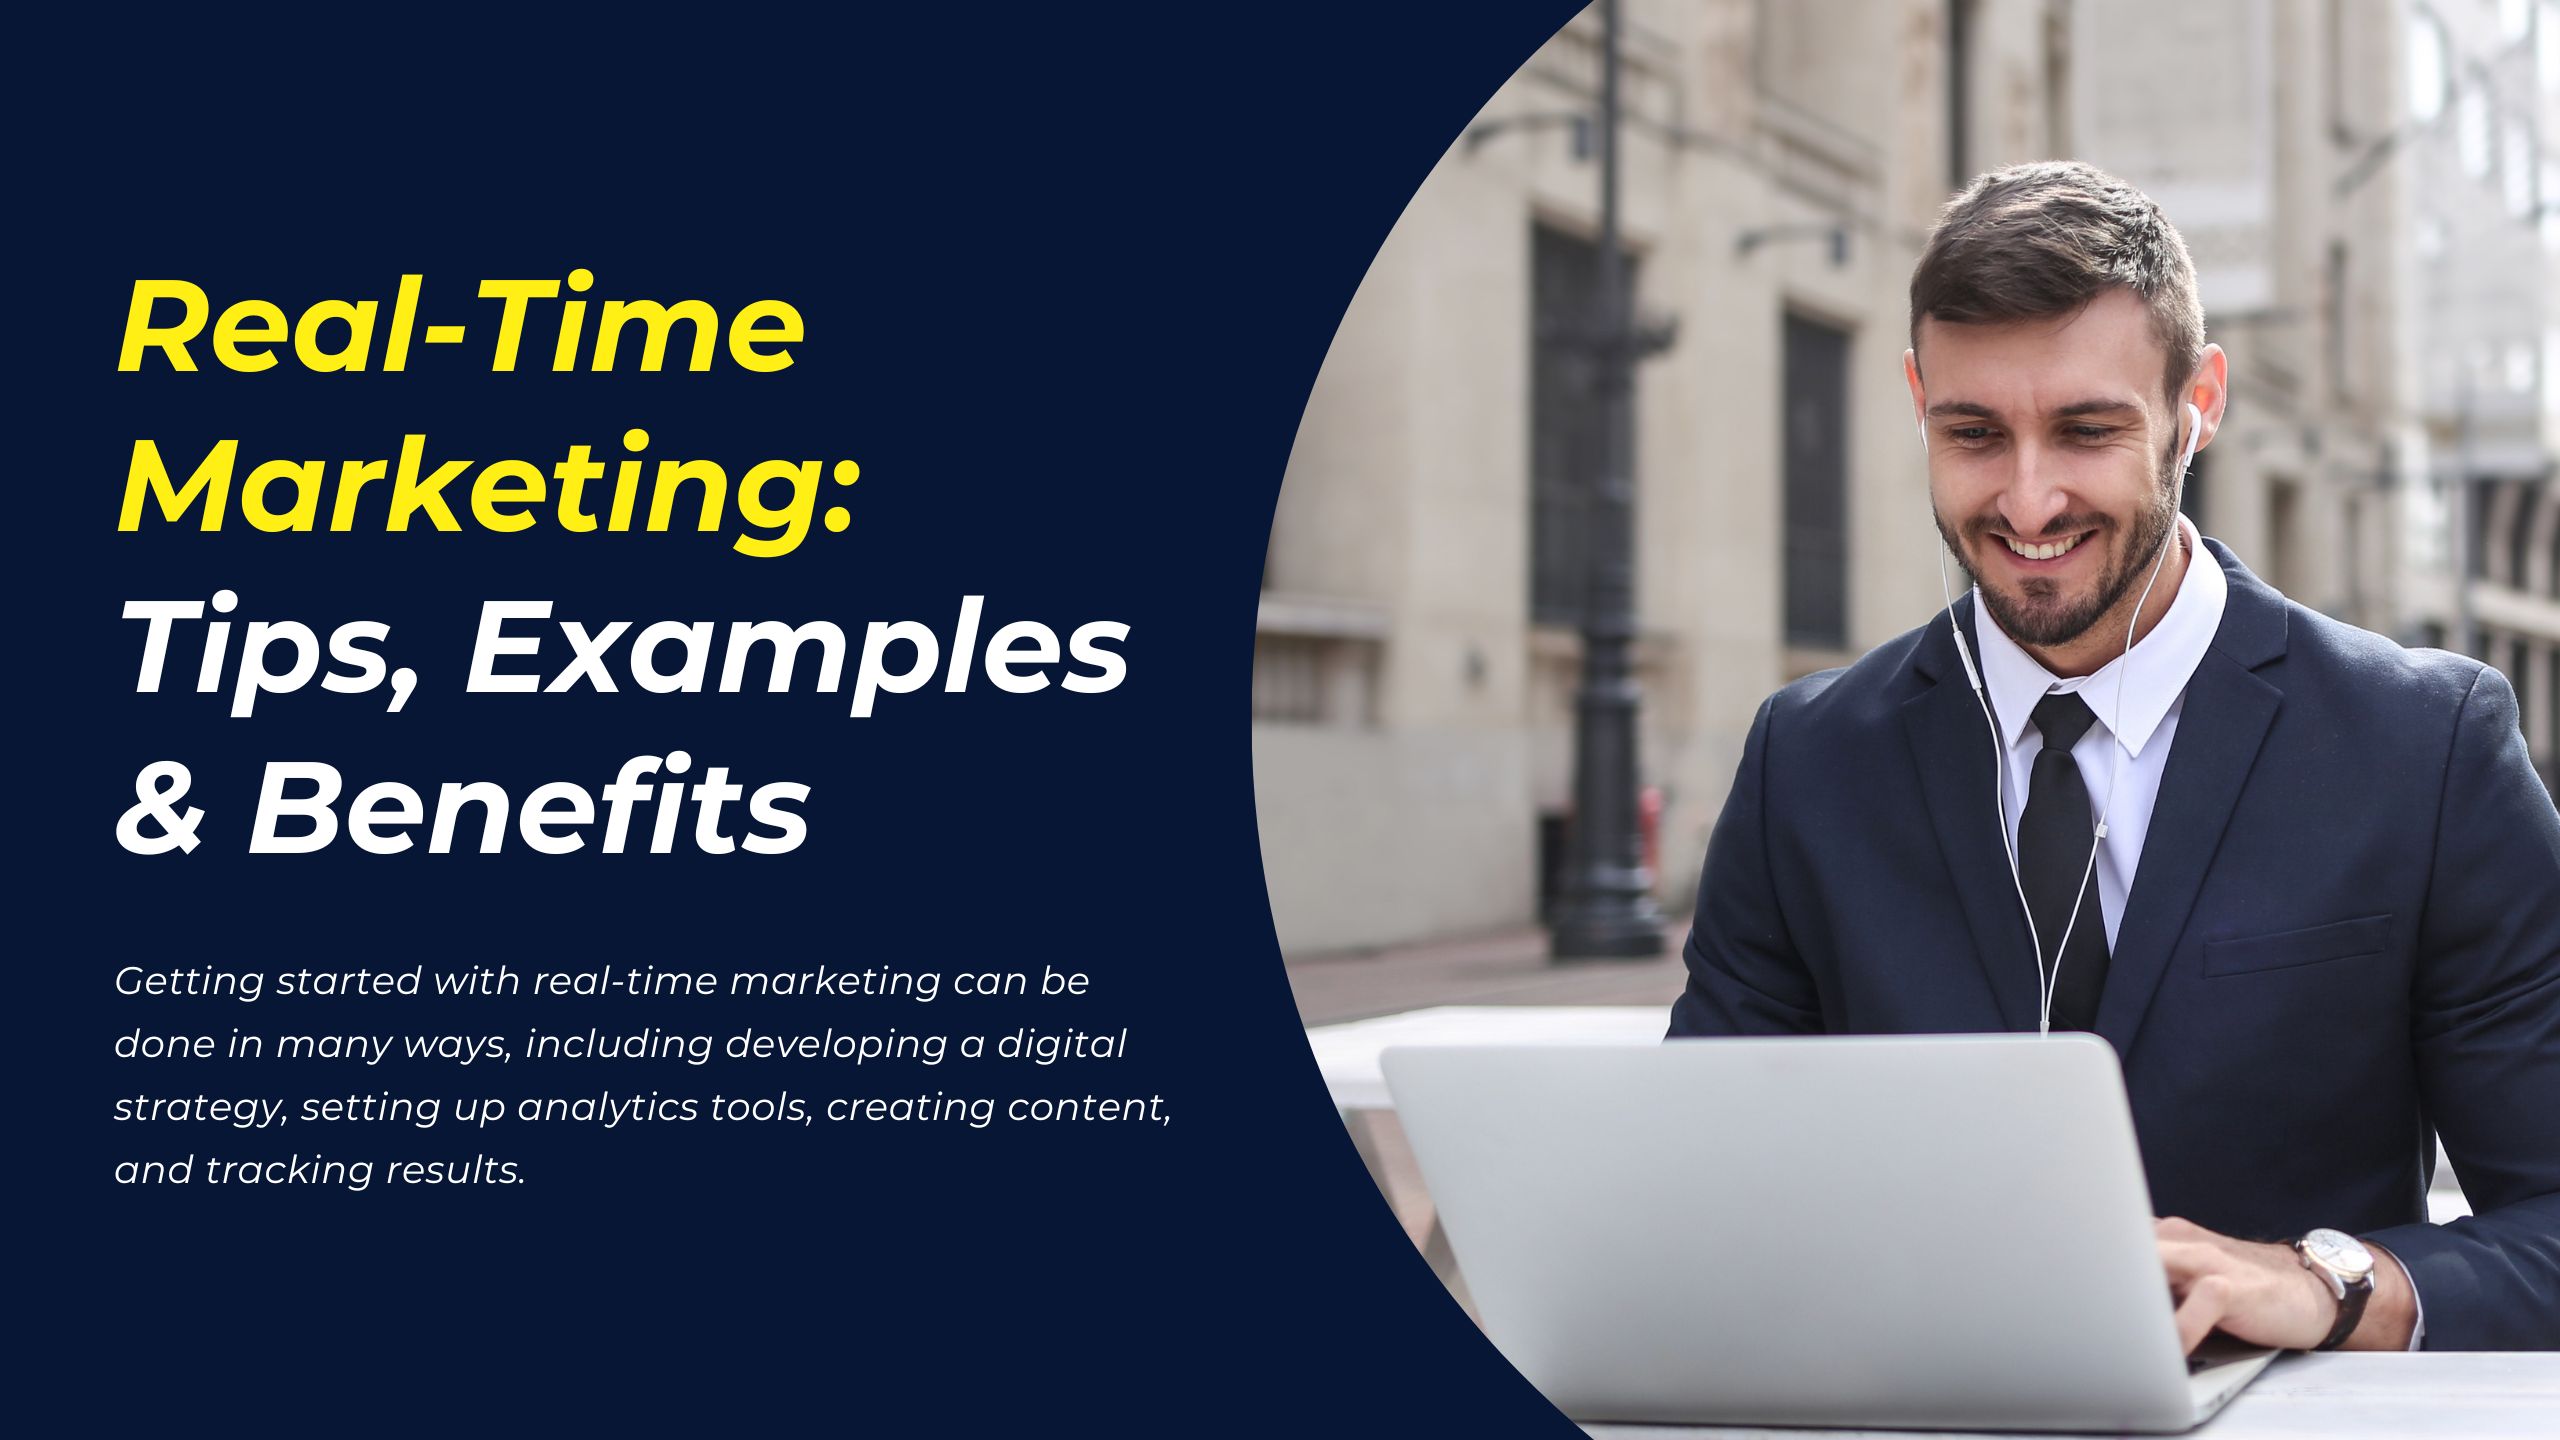 Real time marking tips,examples and benefits